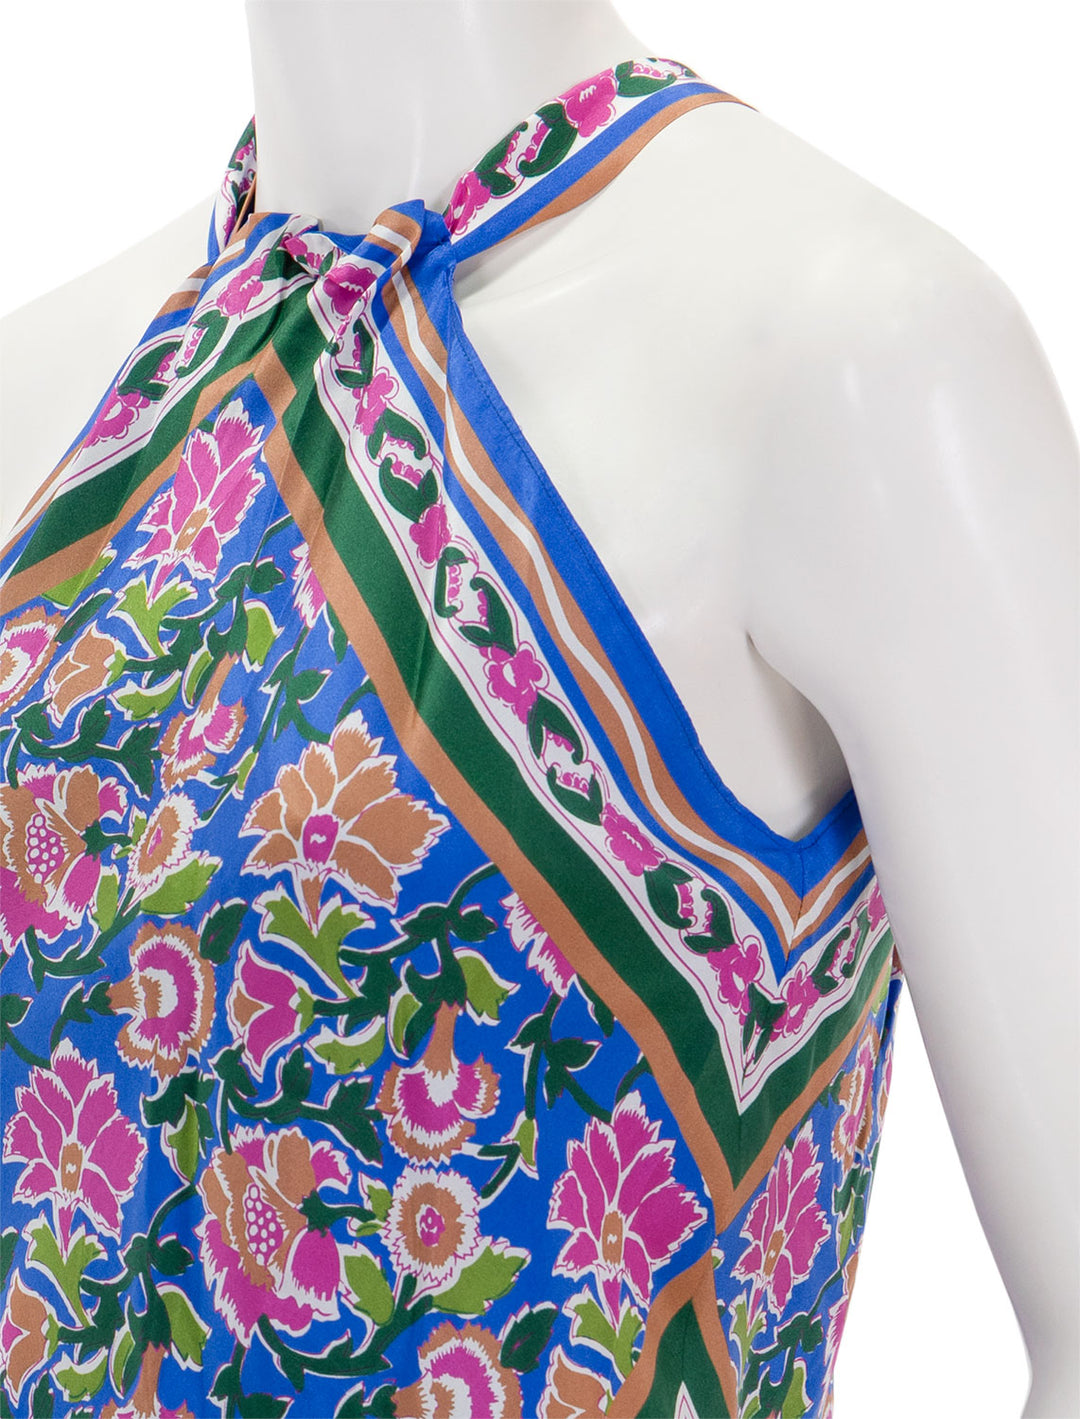 Close-up view of Veronica Beard's raphael top in sarong floral print.